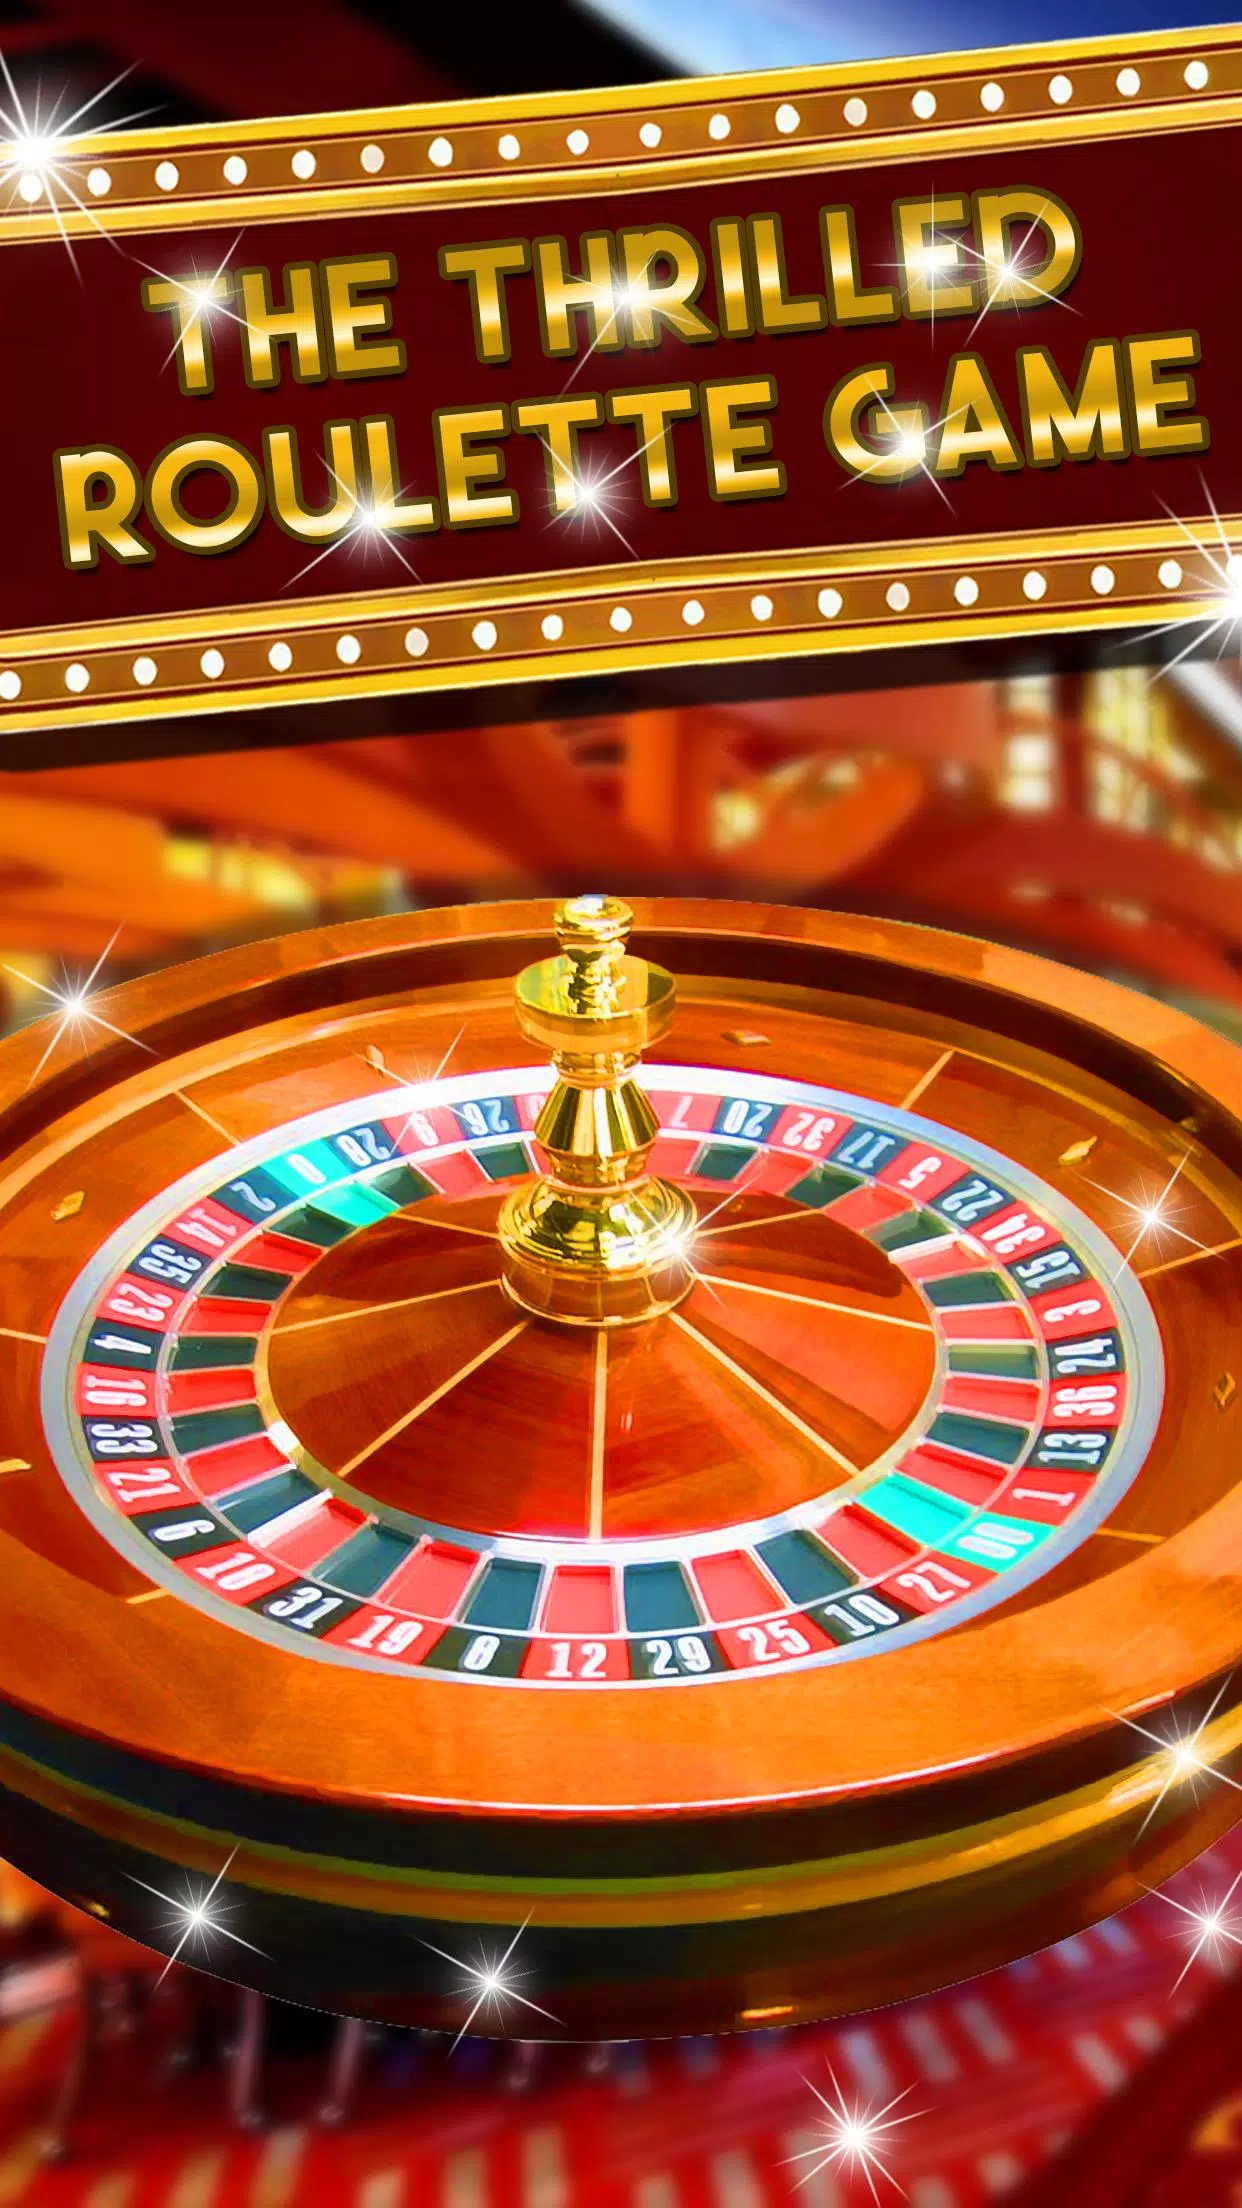 Roulette World - Roulette Casino Games for Android - APK Download